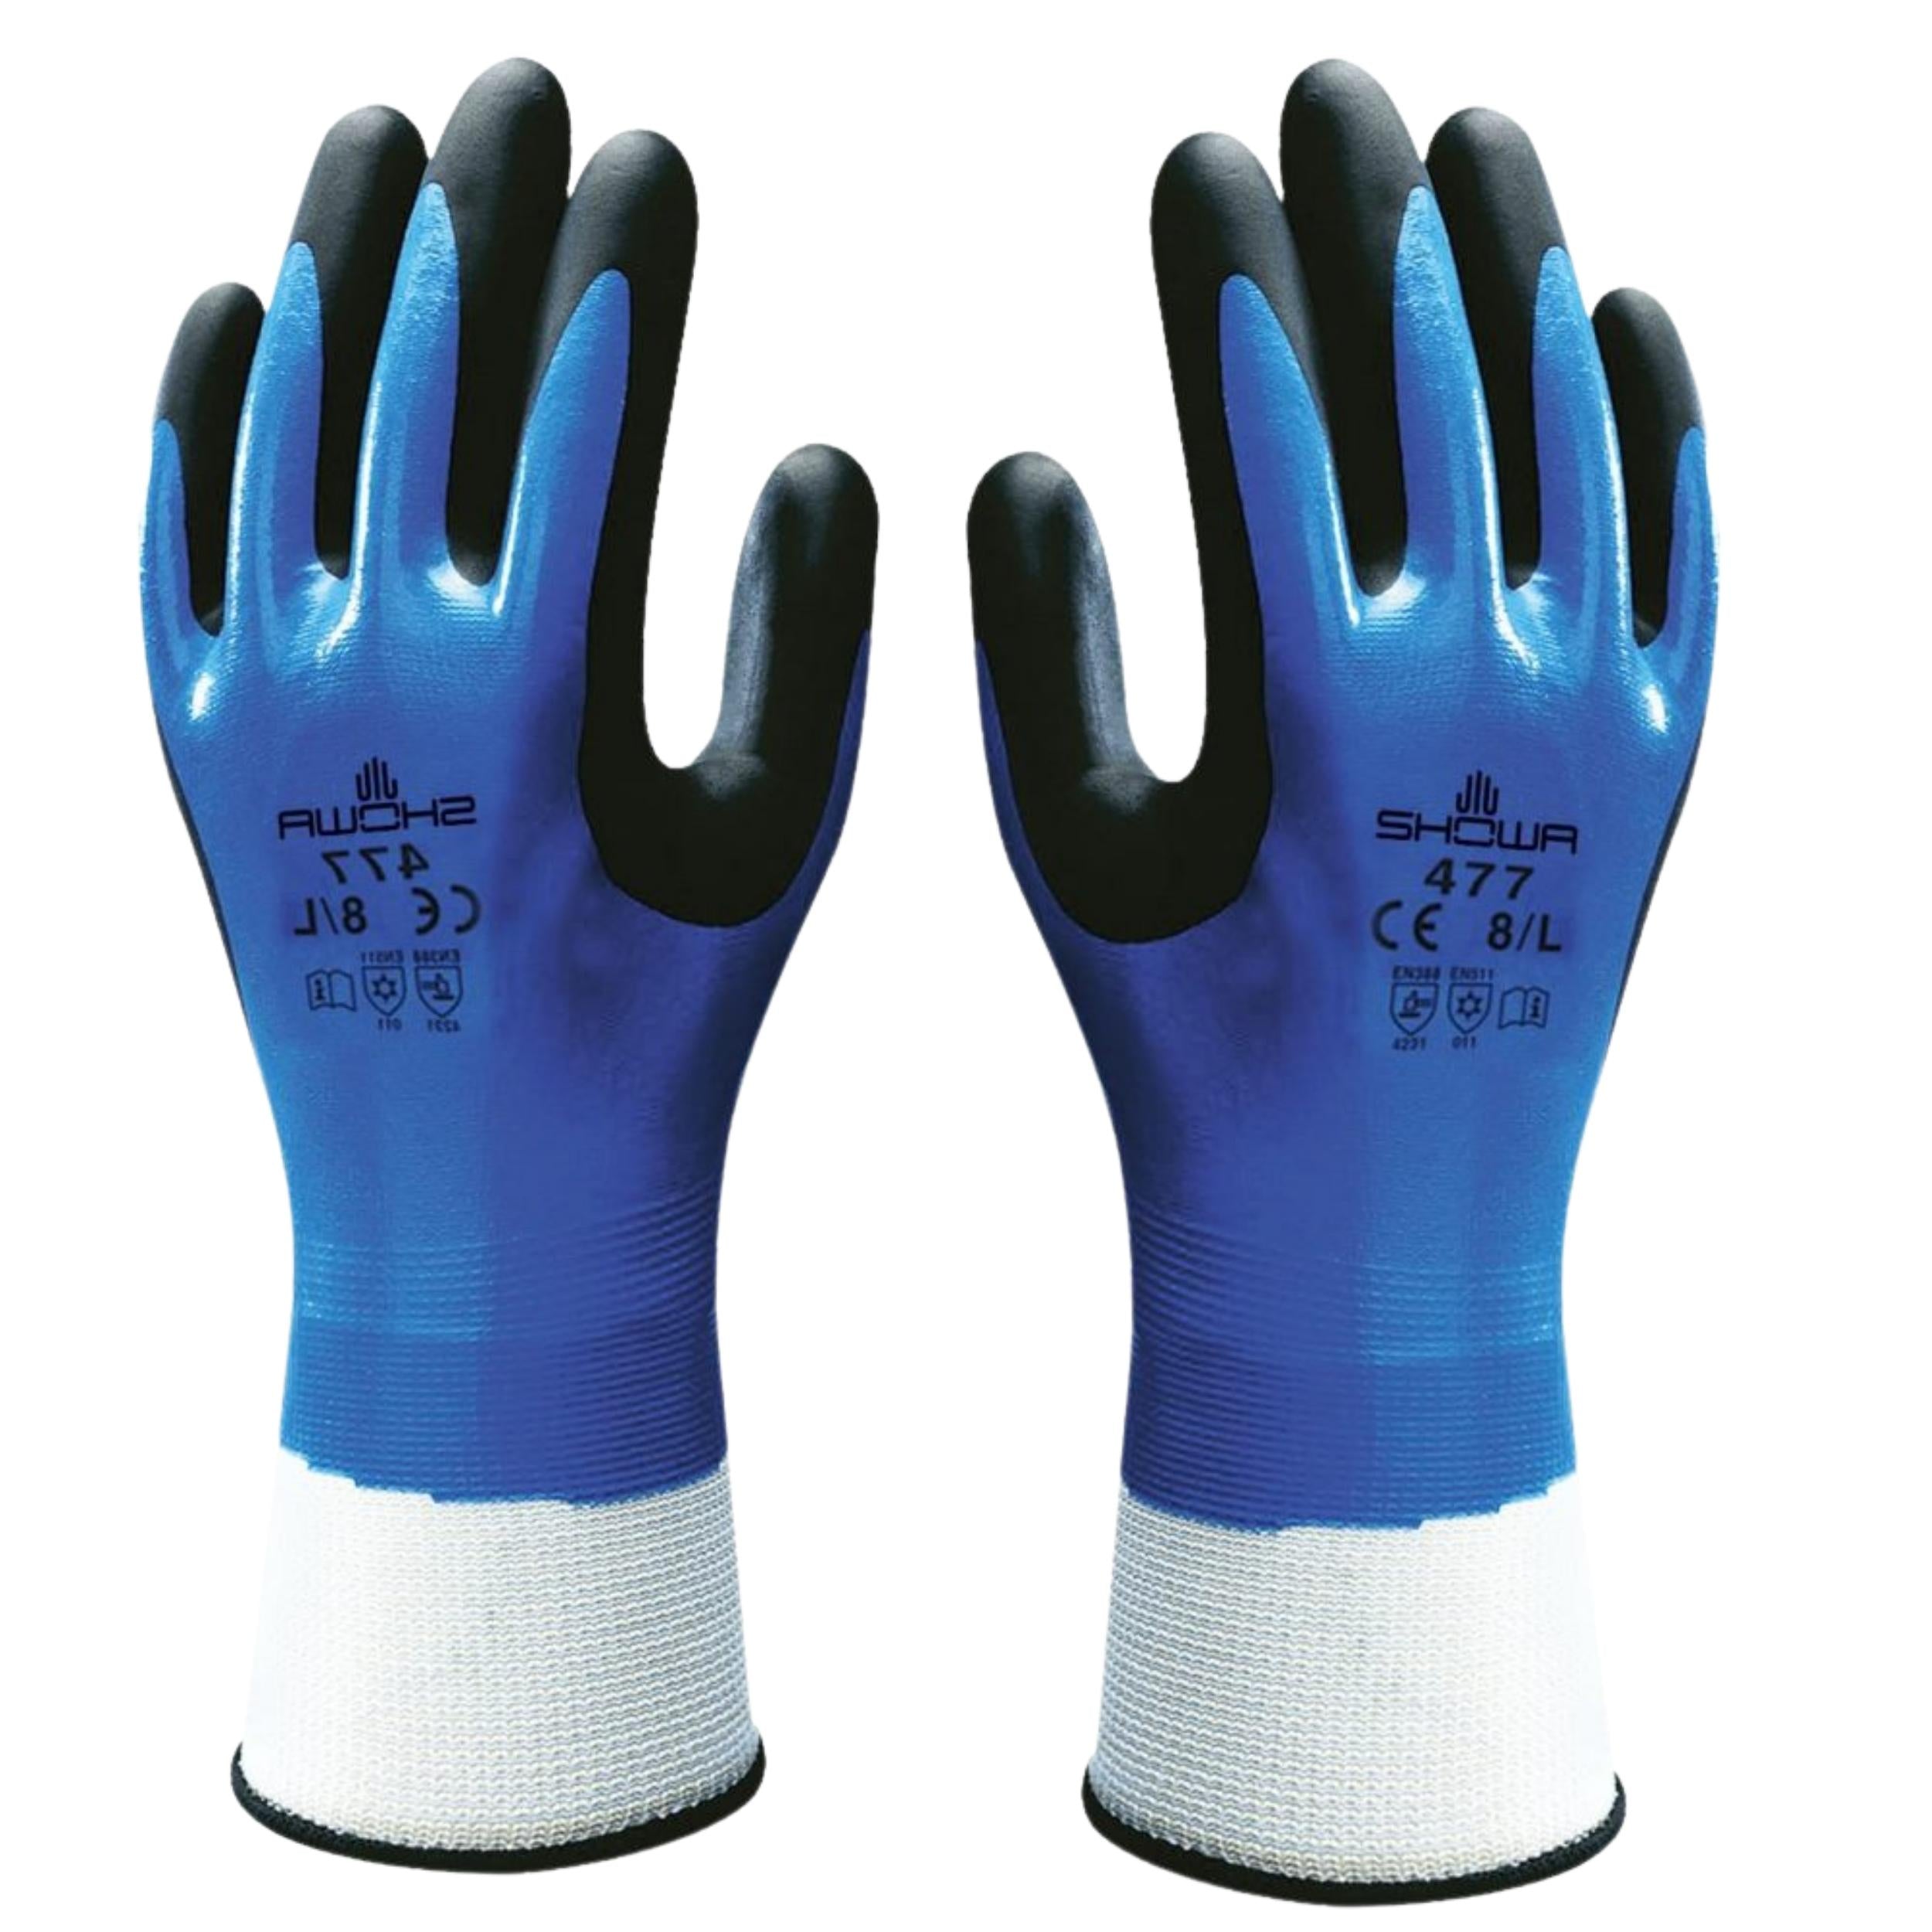 SHOWA 477 Thermal Insulation- Cold Weather Gloves